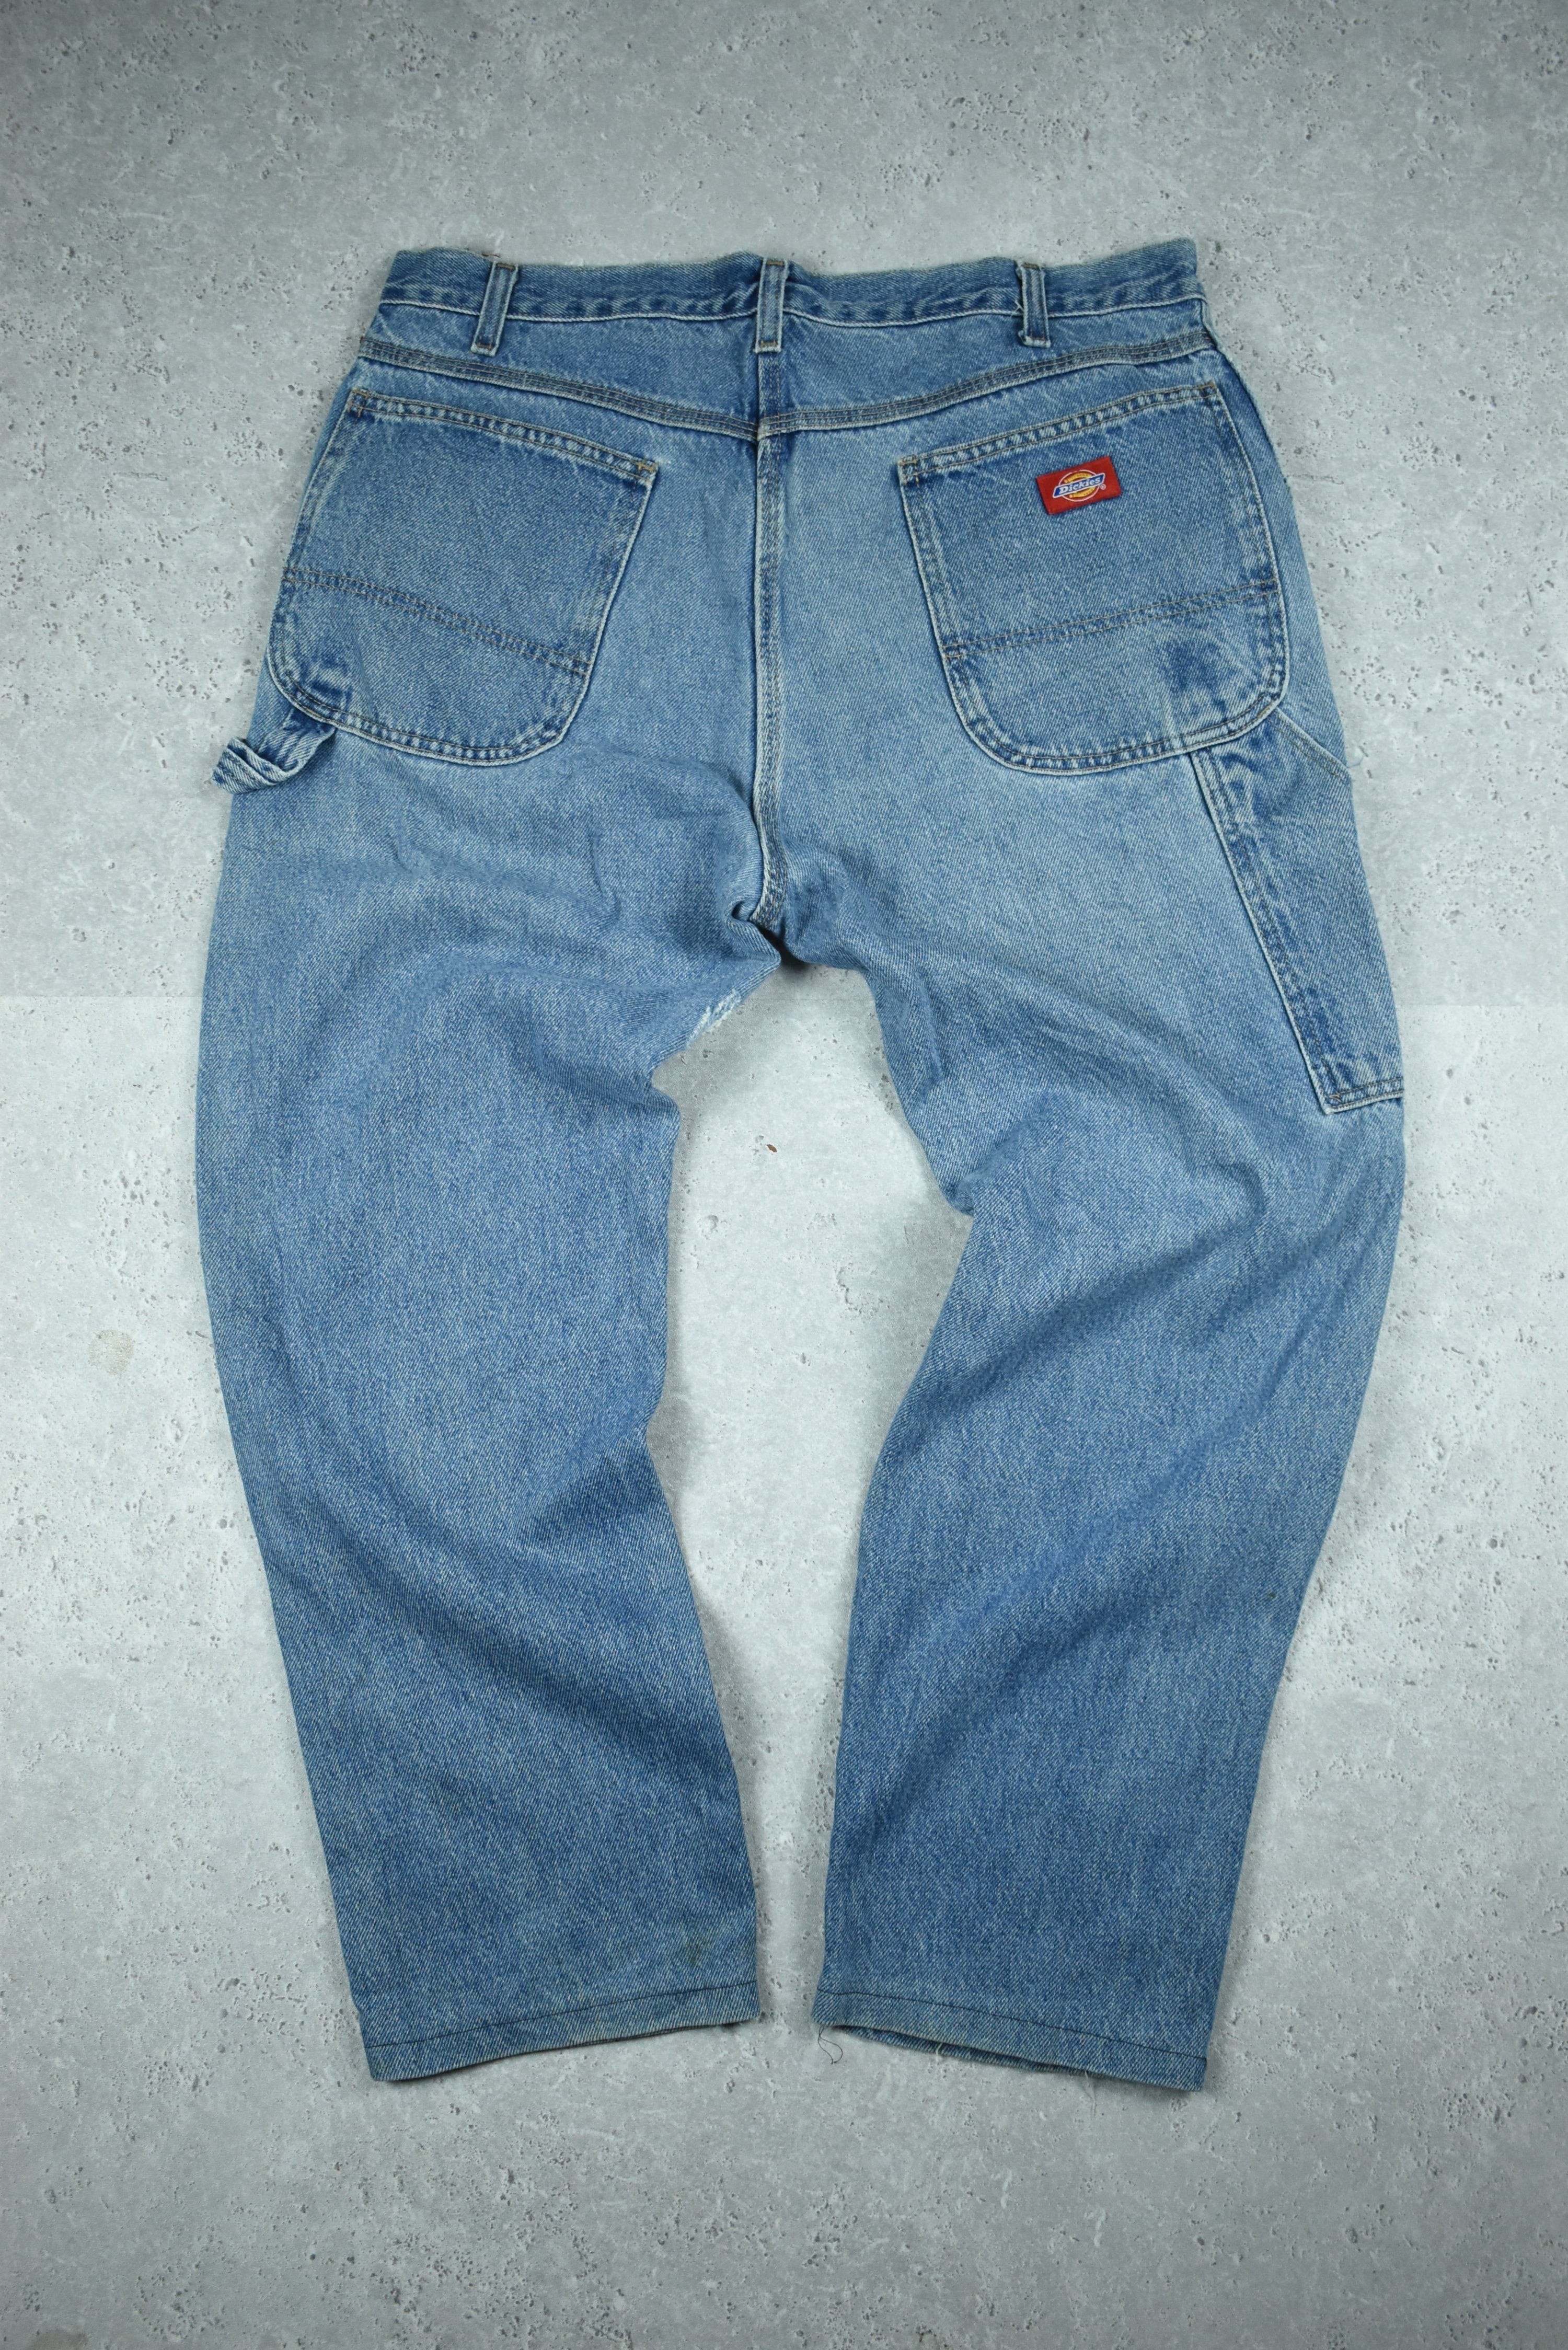 Vintage Dickies Relaxed Fit Denim Jeans 30x28